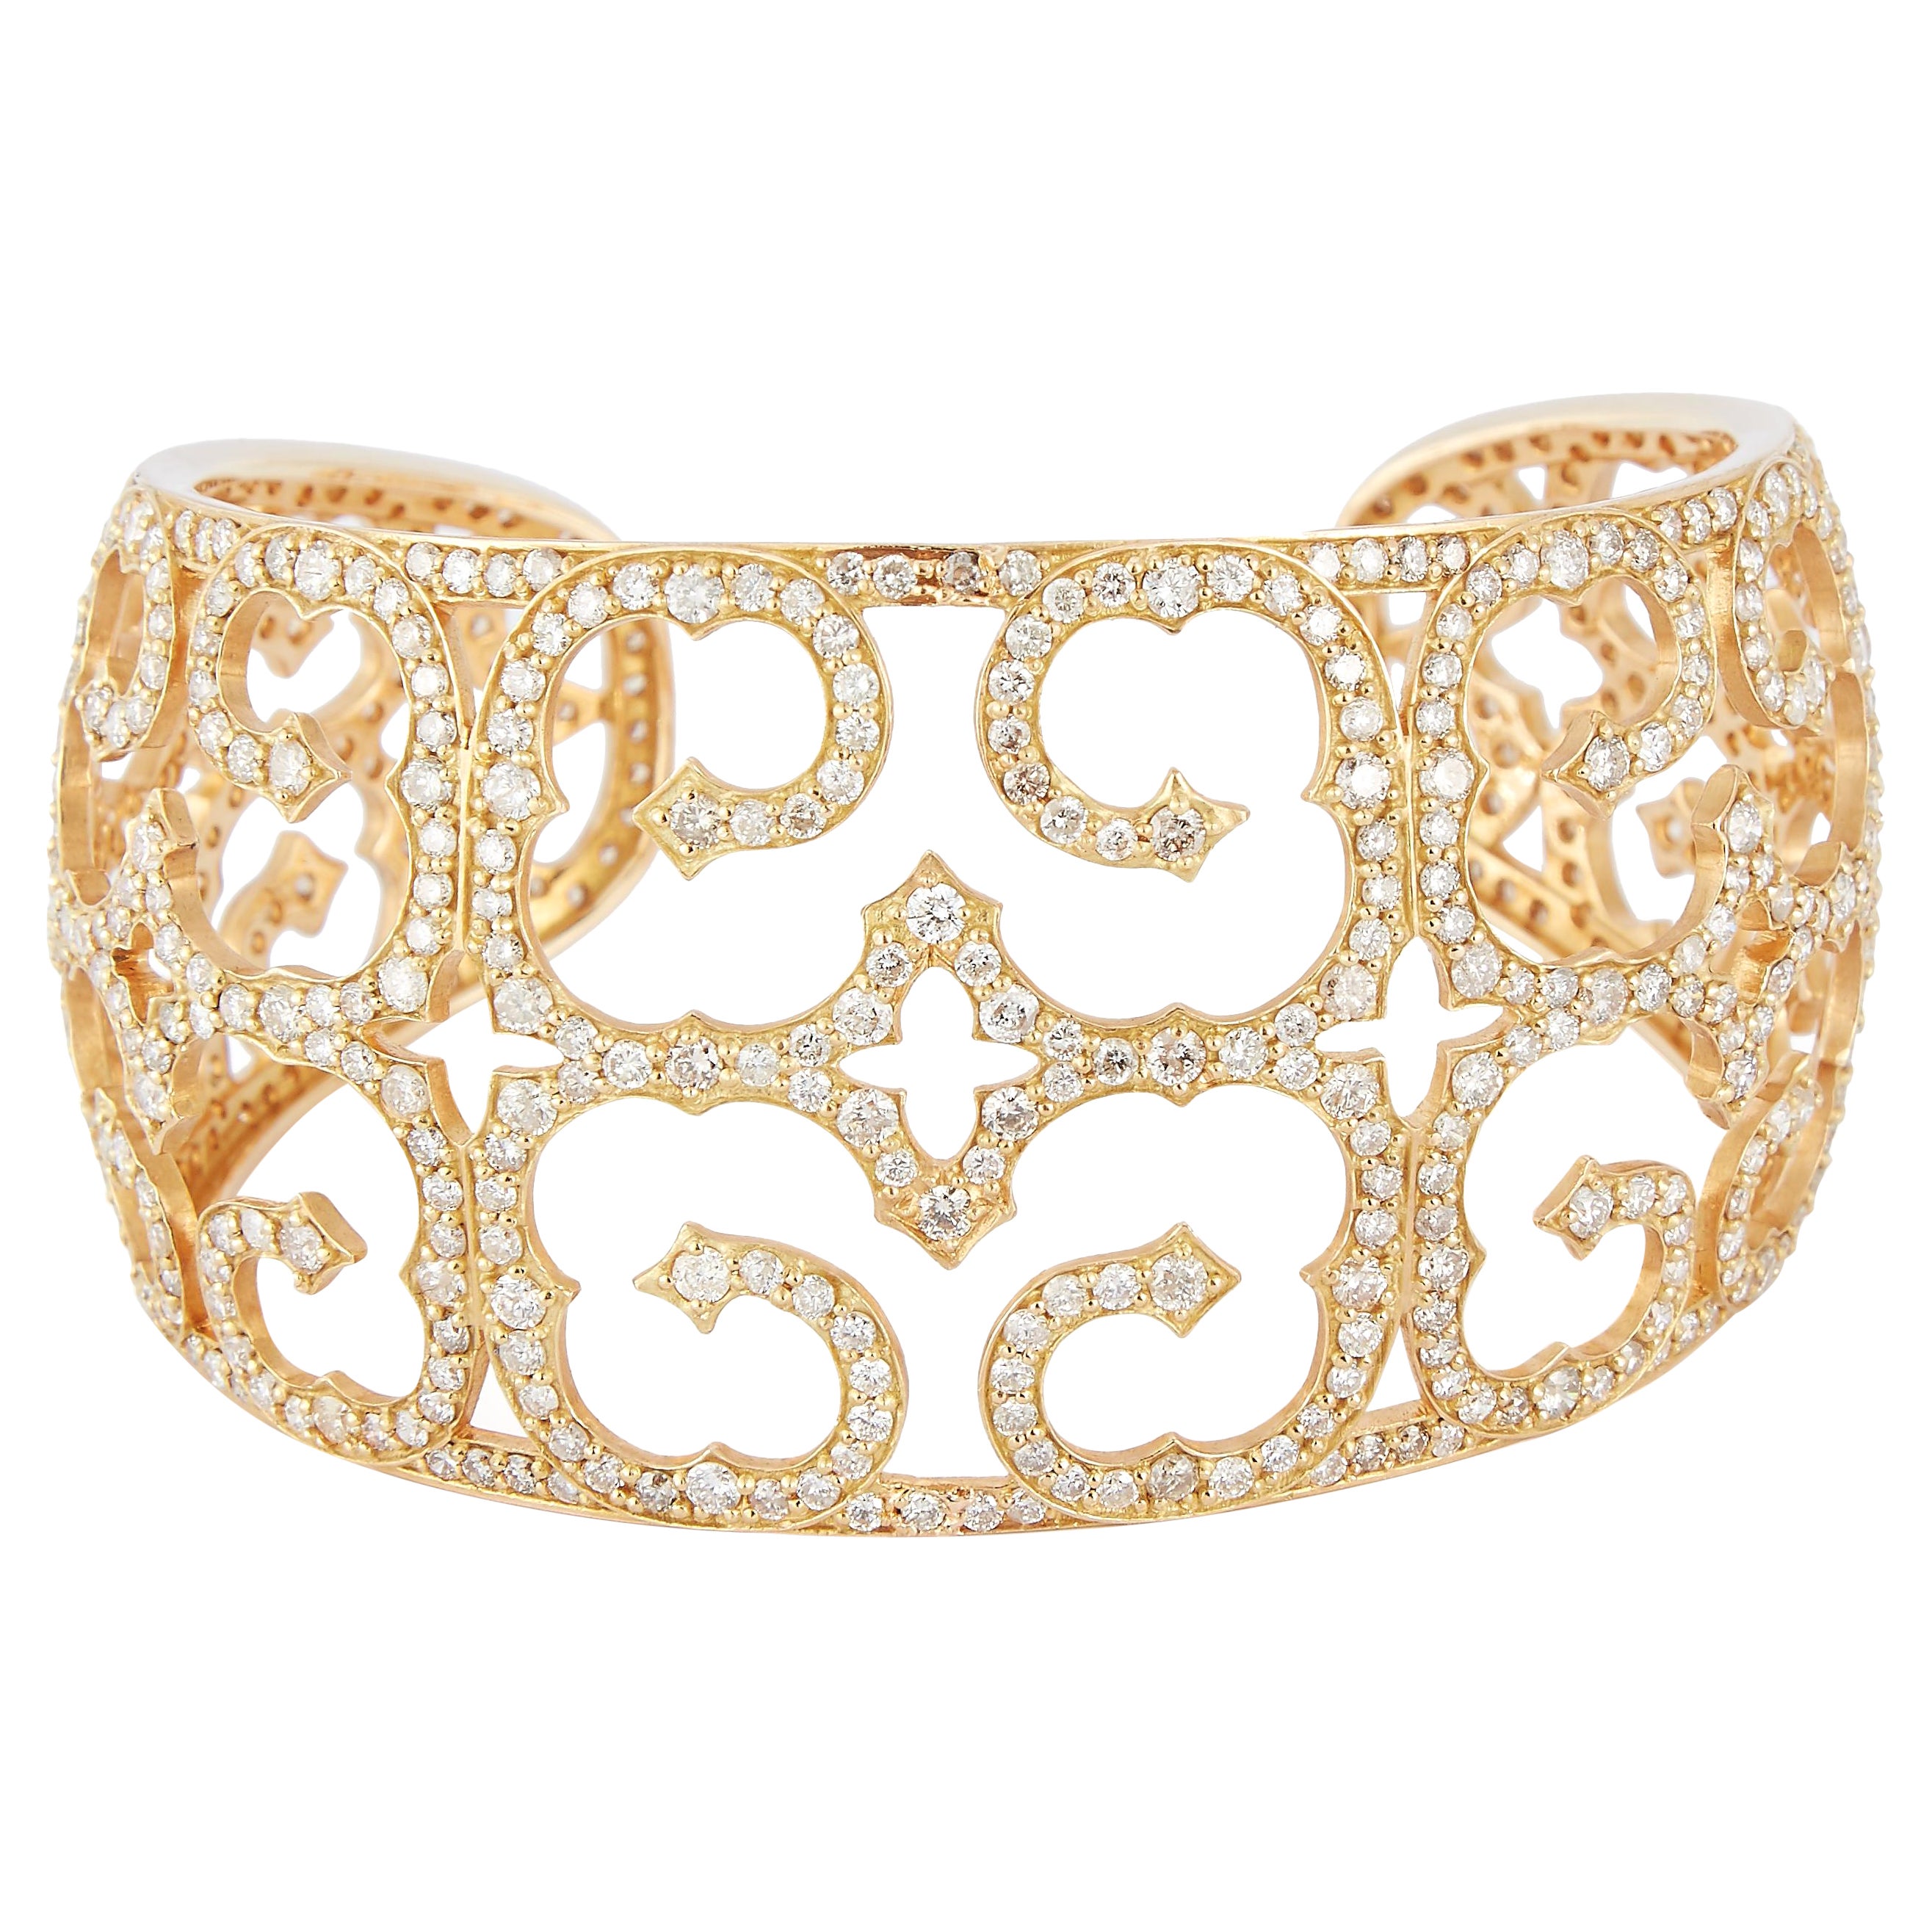 Parulina  10.97ct Diamond and 18K Yellow Gold Cuff For Sale